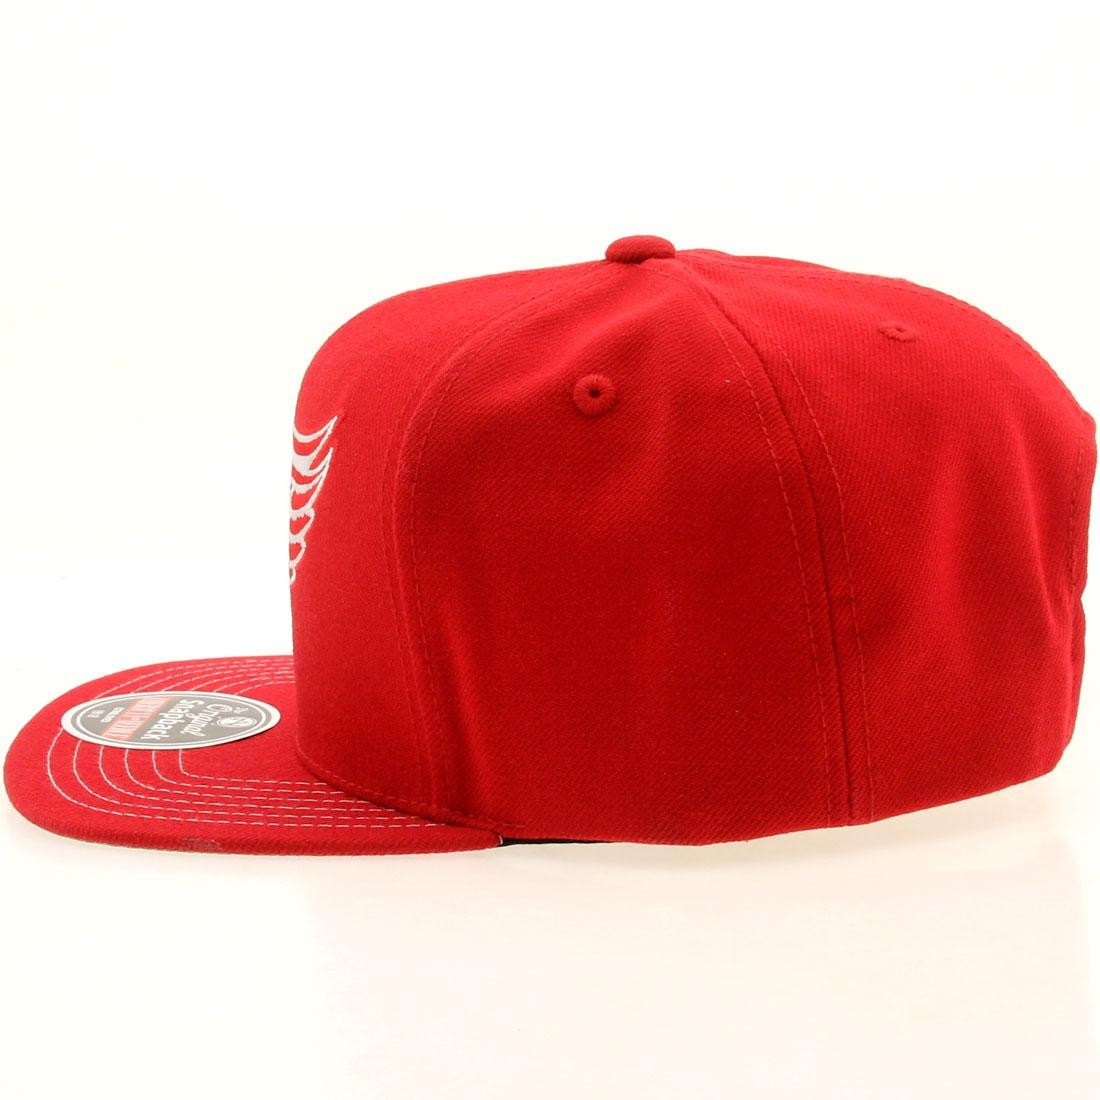 American Needle Detroit Red Wings Mammoth Snapback Cap red red